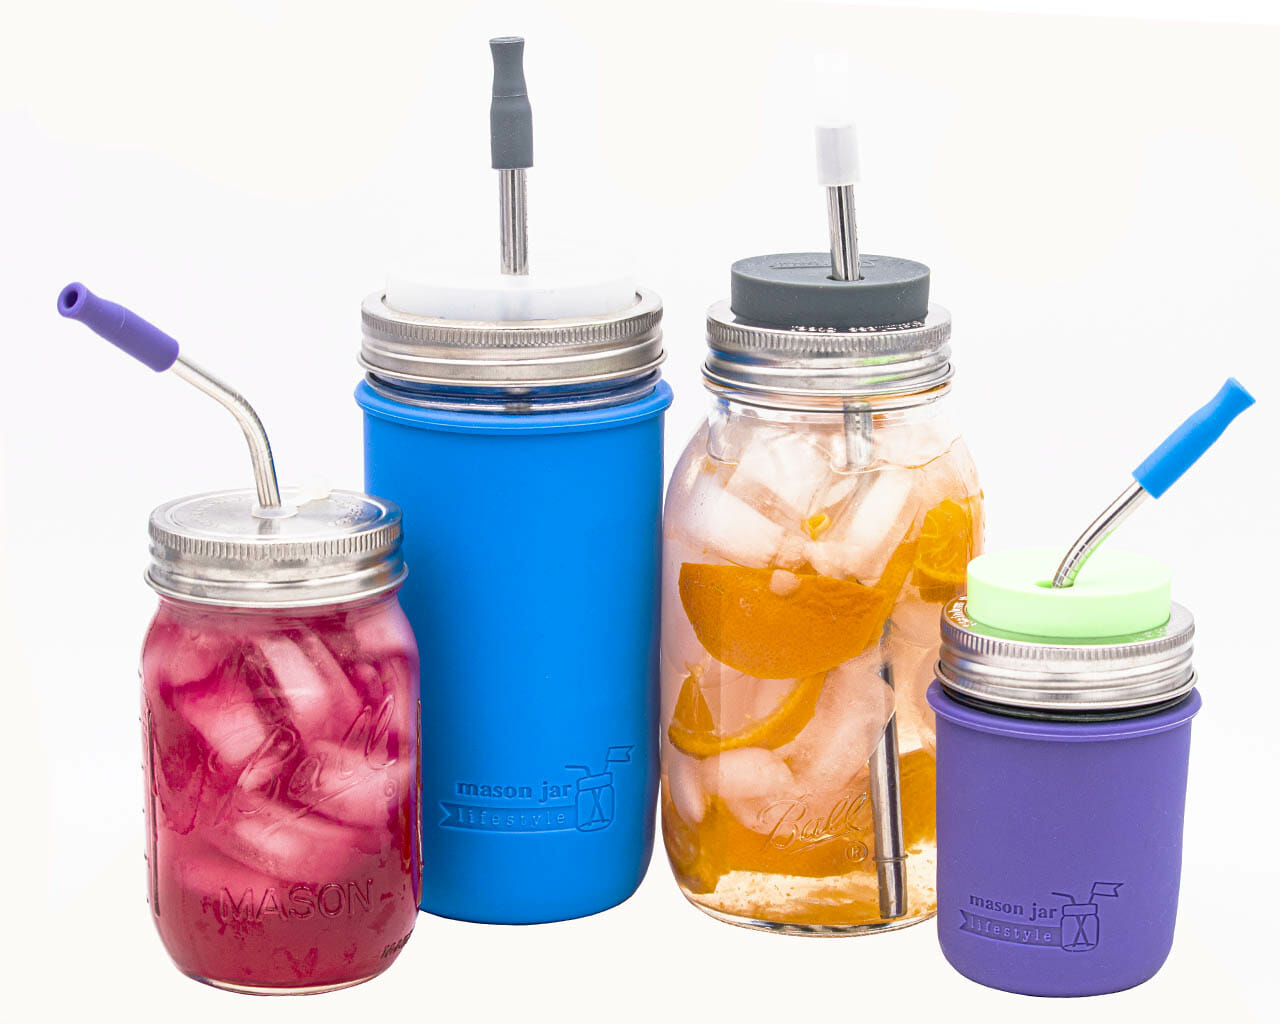 http://masonjarlifestyle.com/cdn/shop/files/mason-jar-lifestyle-silicone-straw-tip-protector-group-frost-bright-blue-ultra-violet-charcoal-gray-stainless-steel-hole-lid-24oz-8oz-sleeve-32oz-ice-water-juice-drink.jpg?v=1695767348